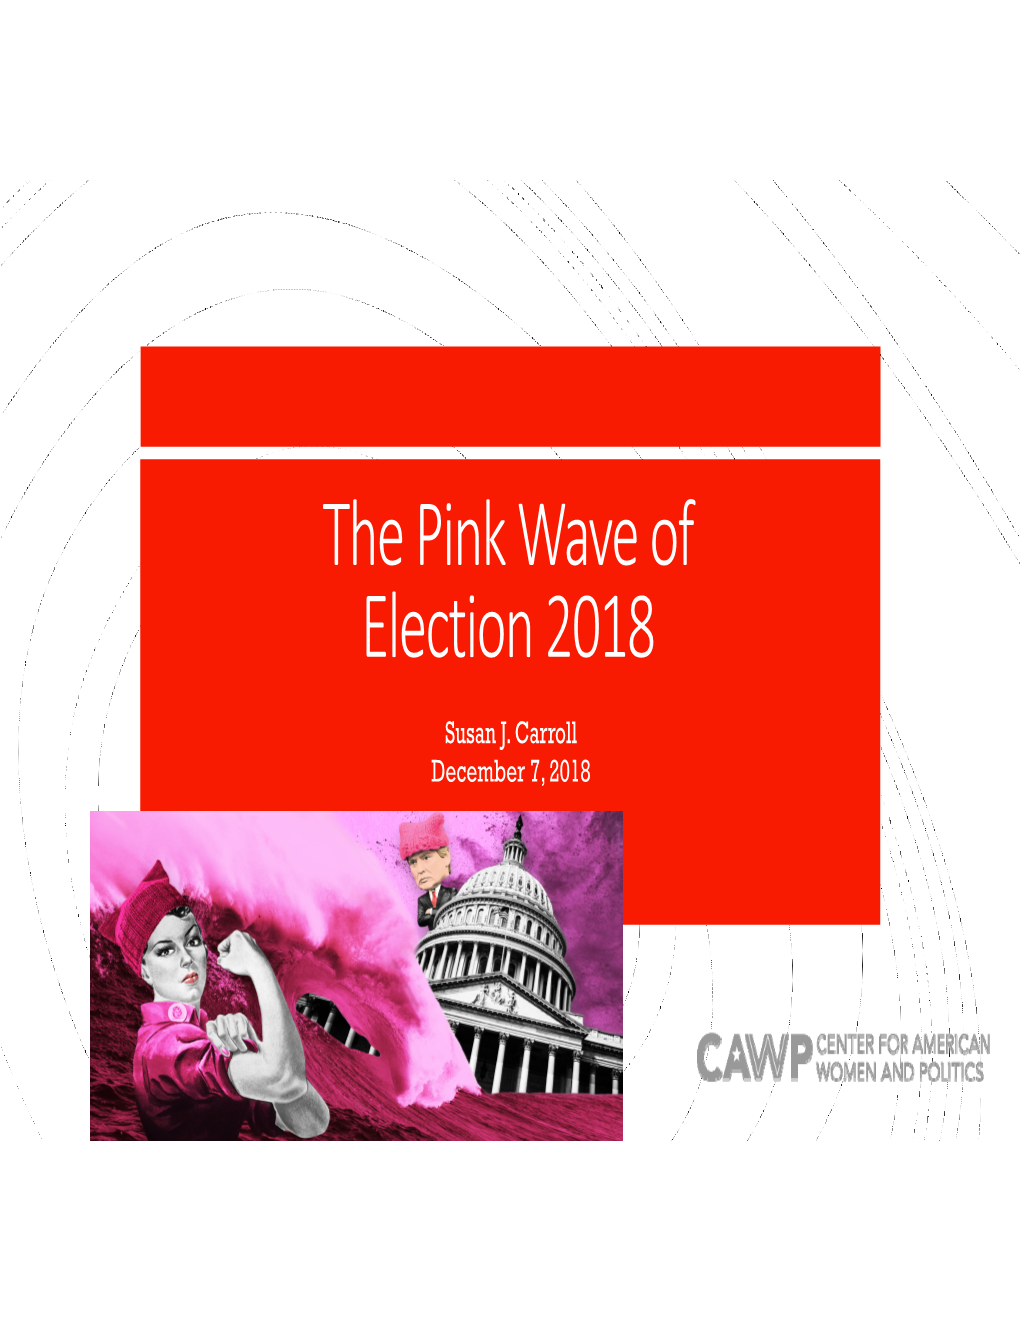 The Pink Wave of Election 2018